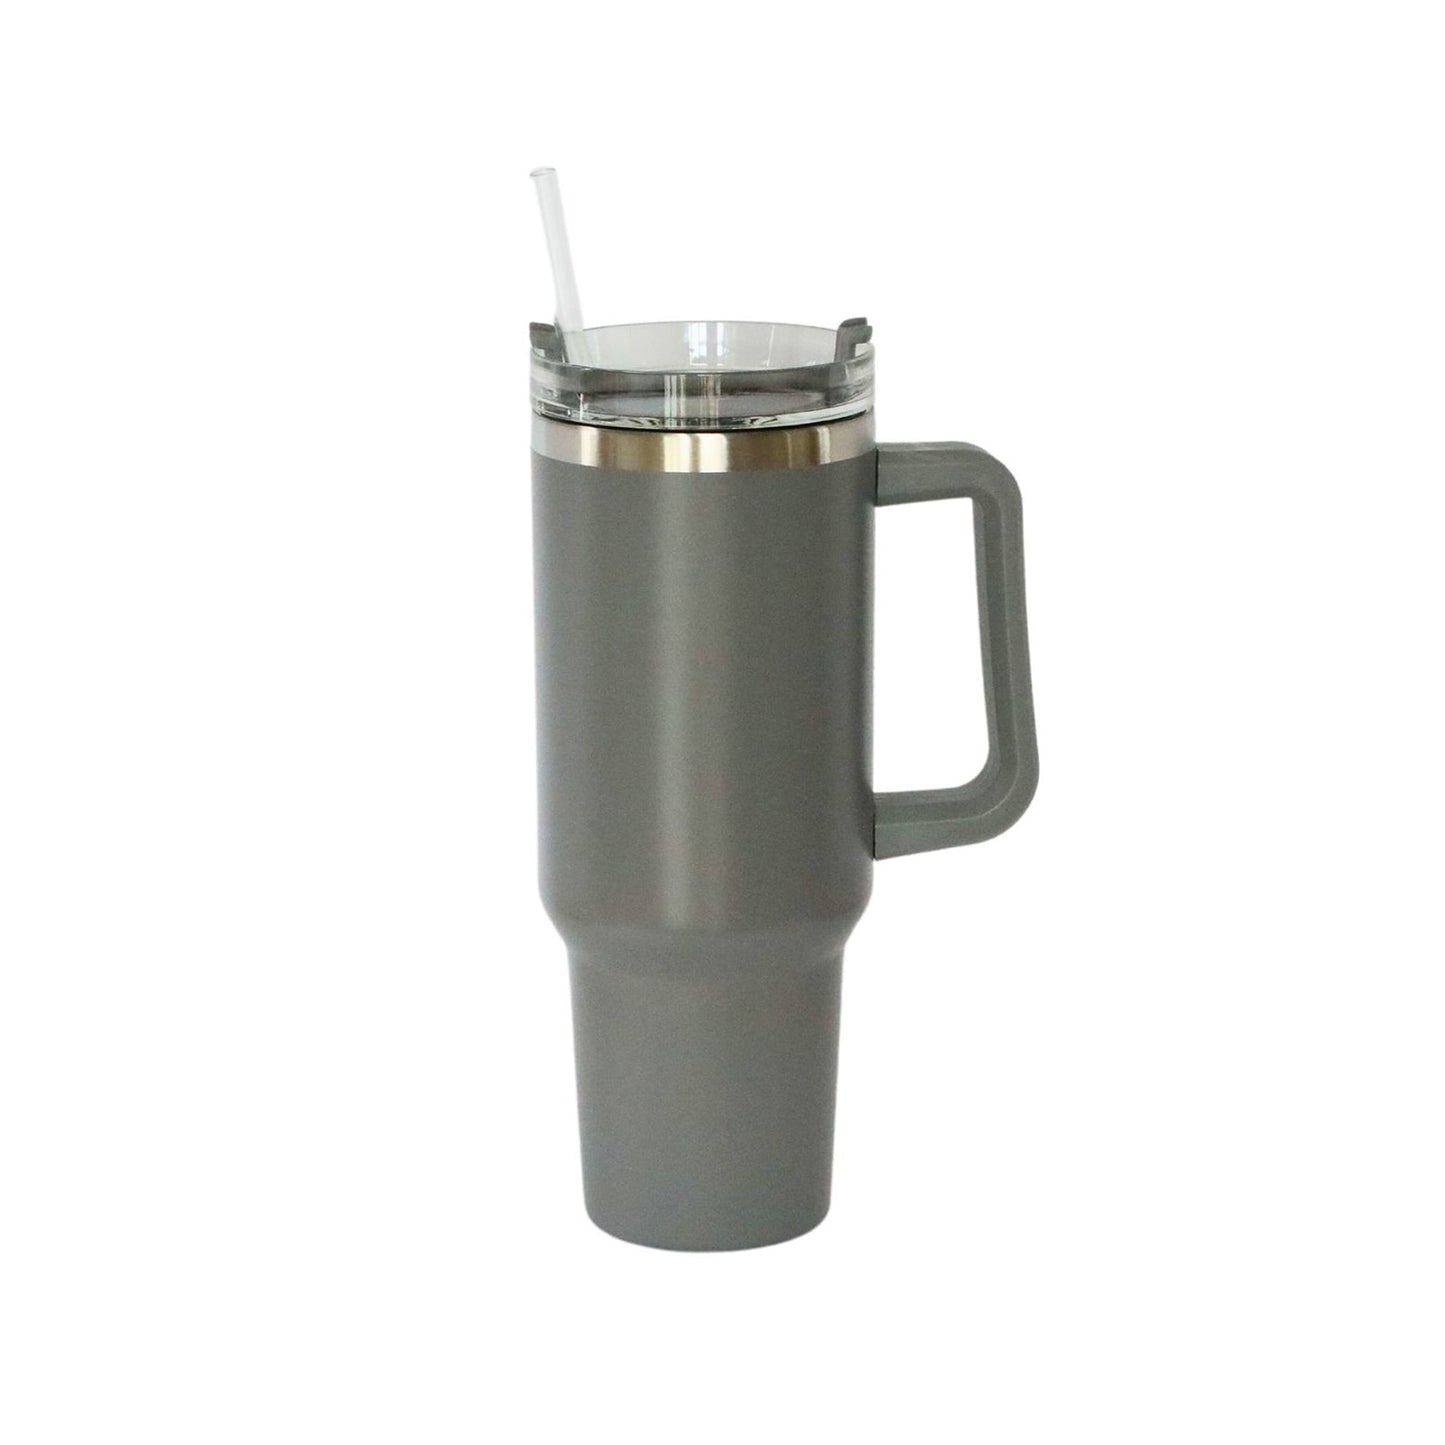 40 Oz Stainless Steel Tumbler with Handle & Straw - Grey by Creative Gifts